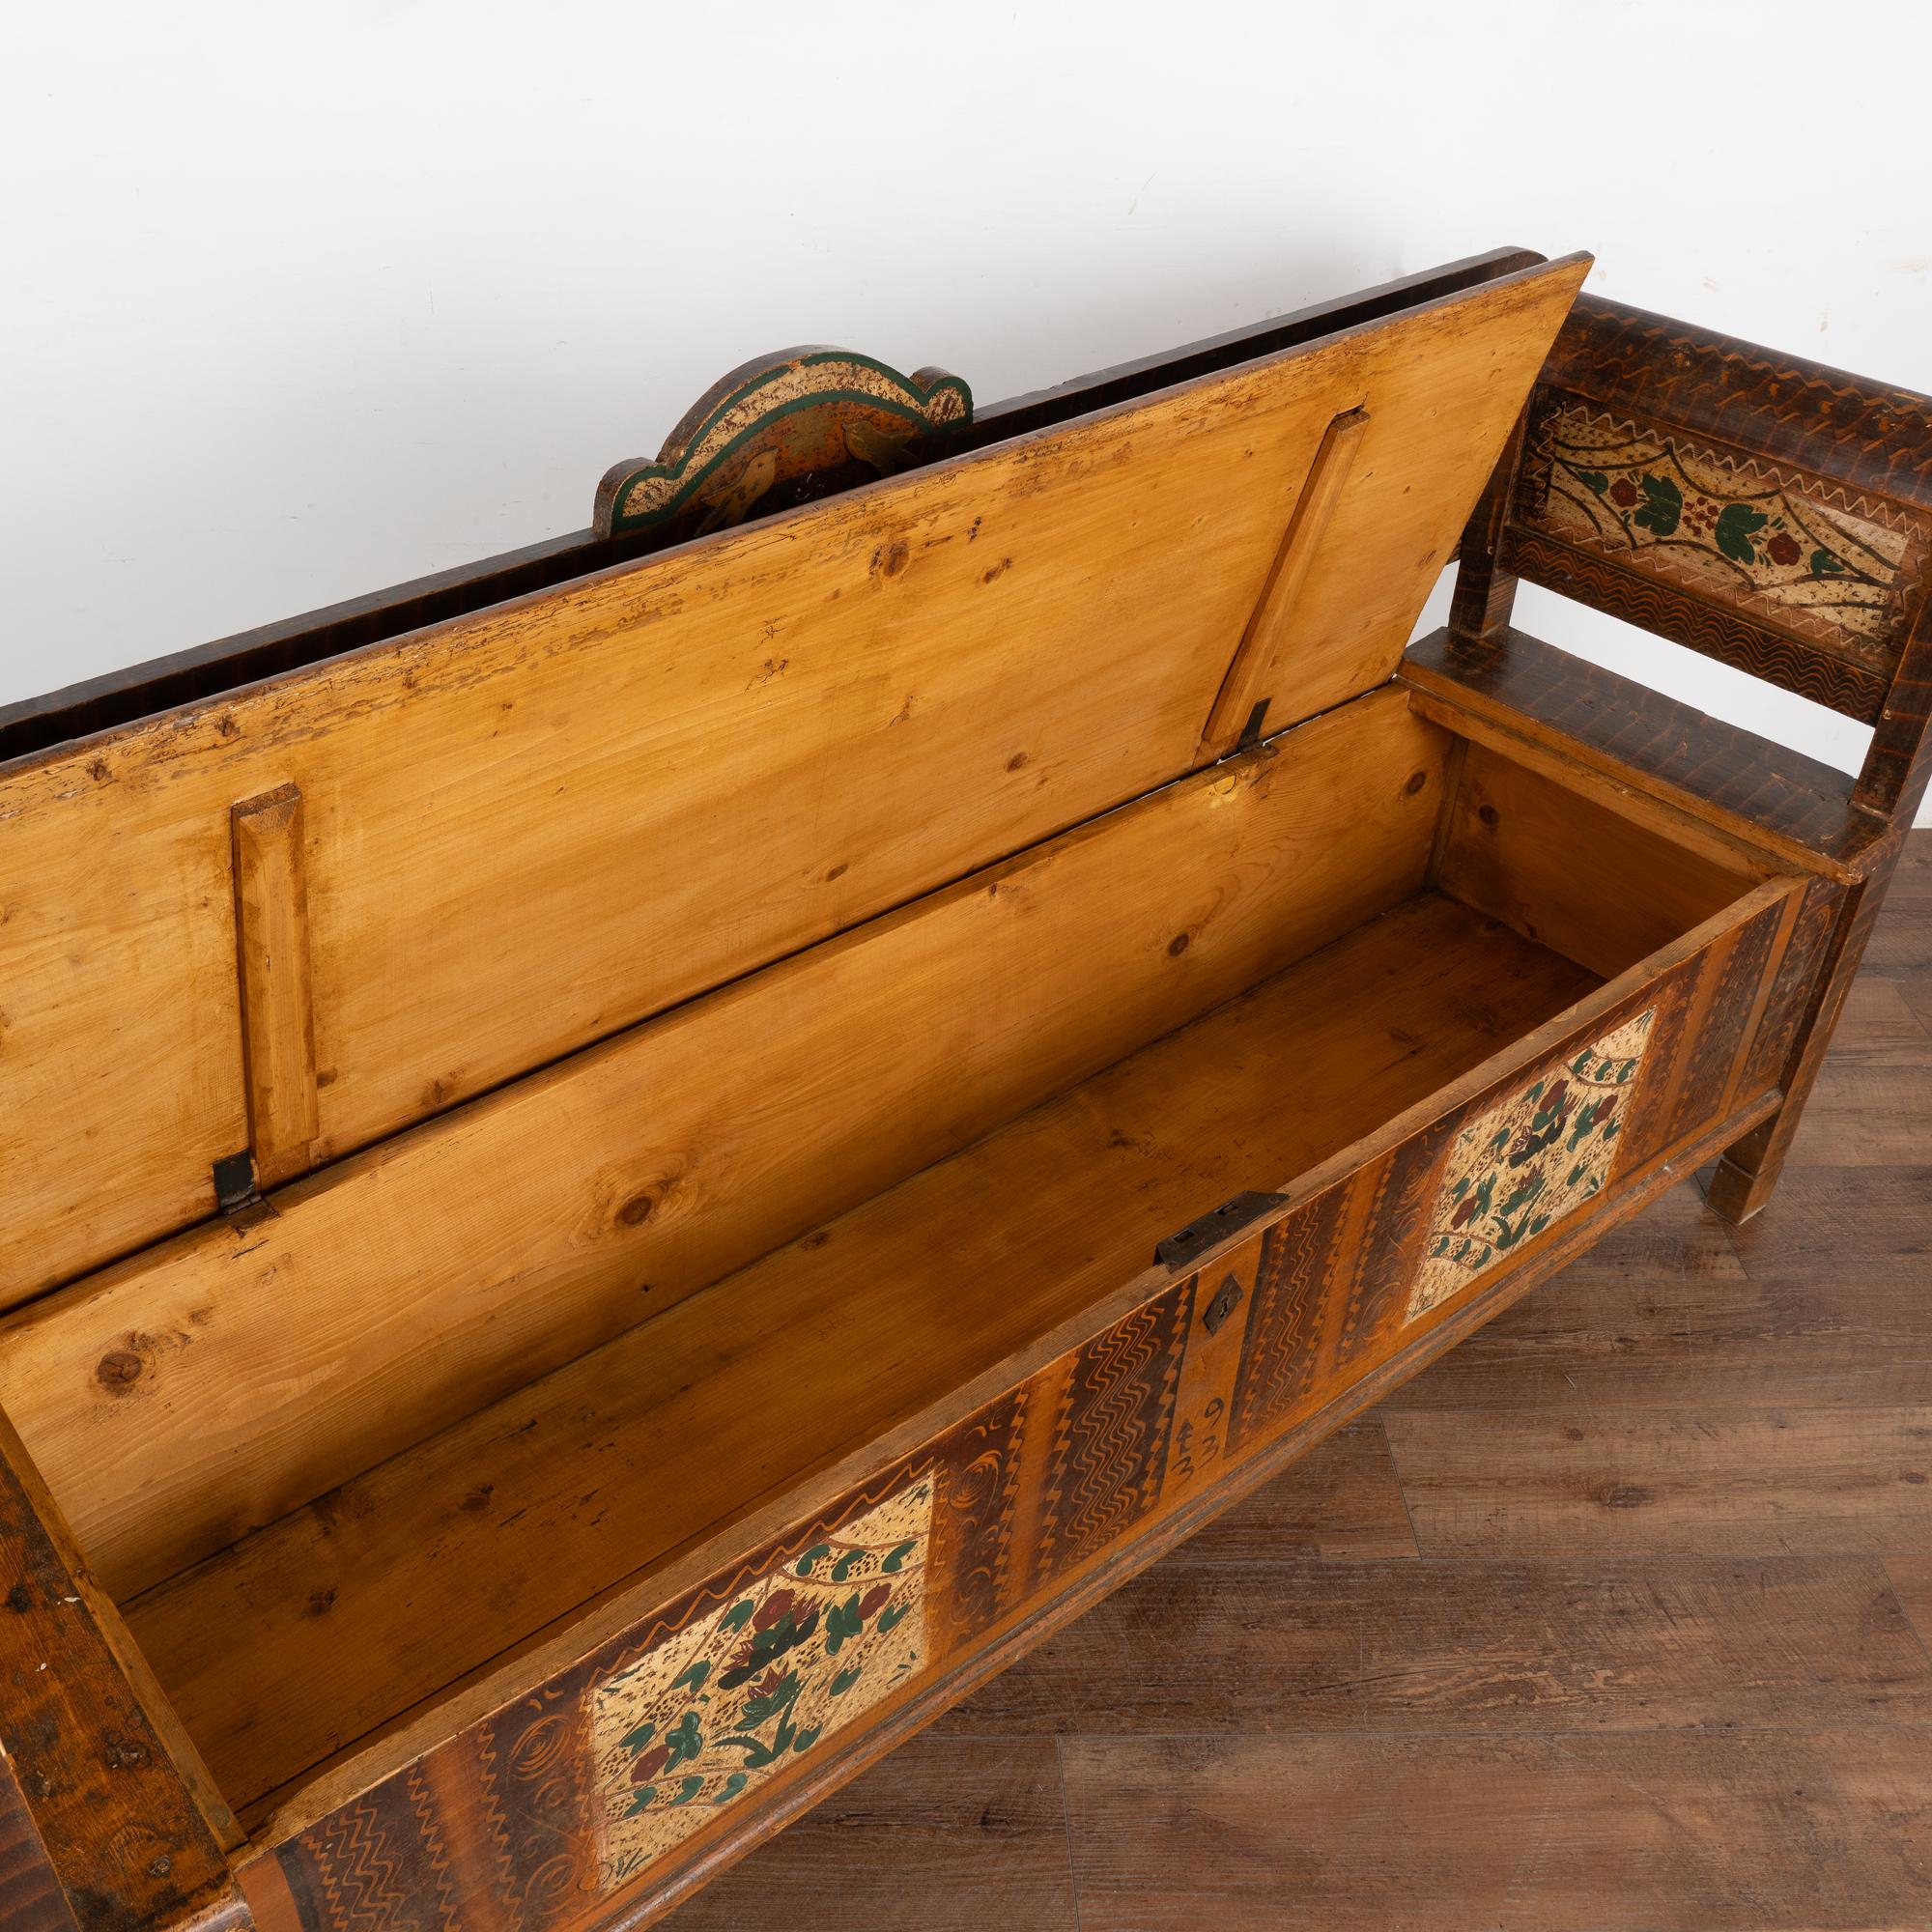 Original Painted Folk Art Bench With Carved Birds, Hungary dated 1933 For Sale 5